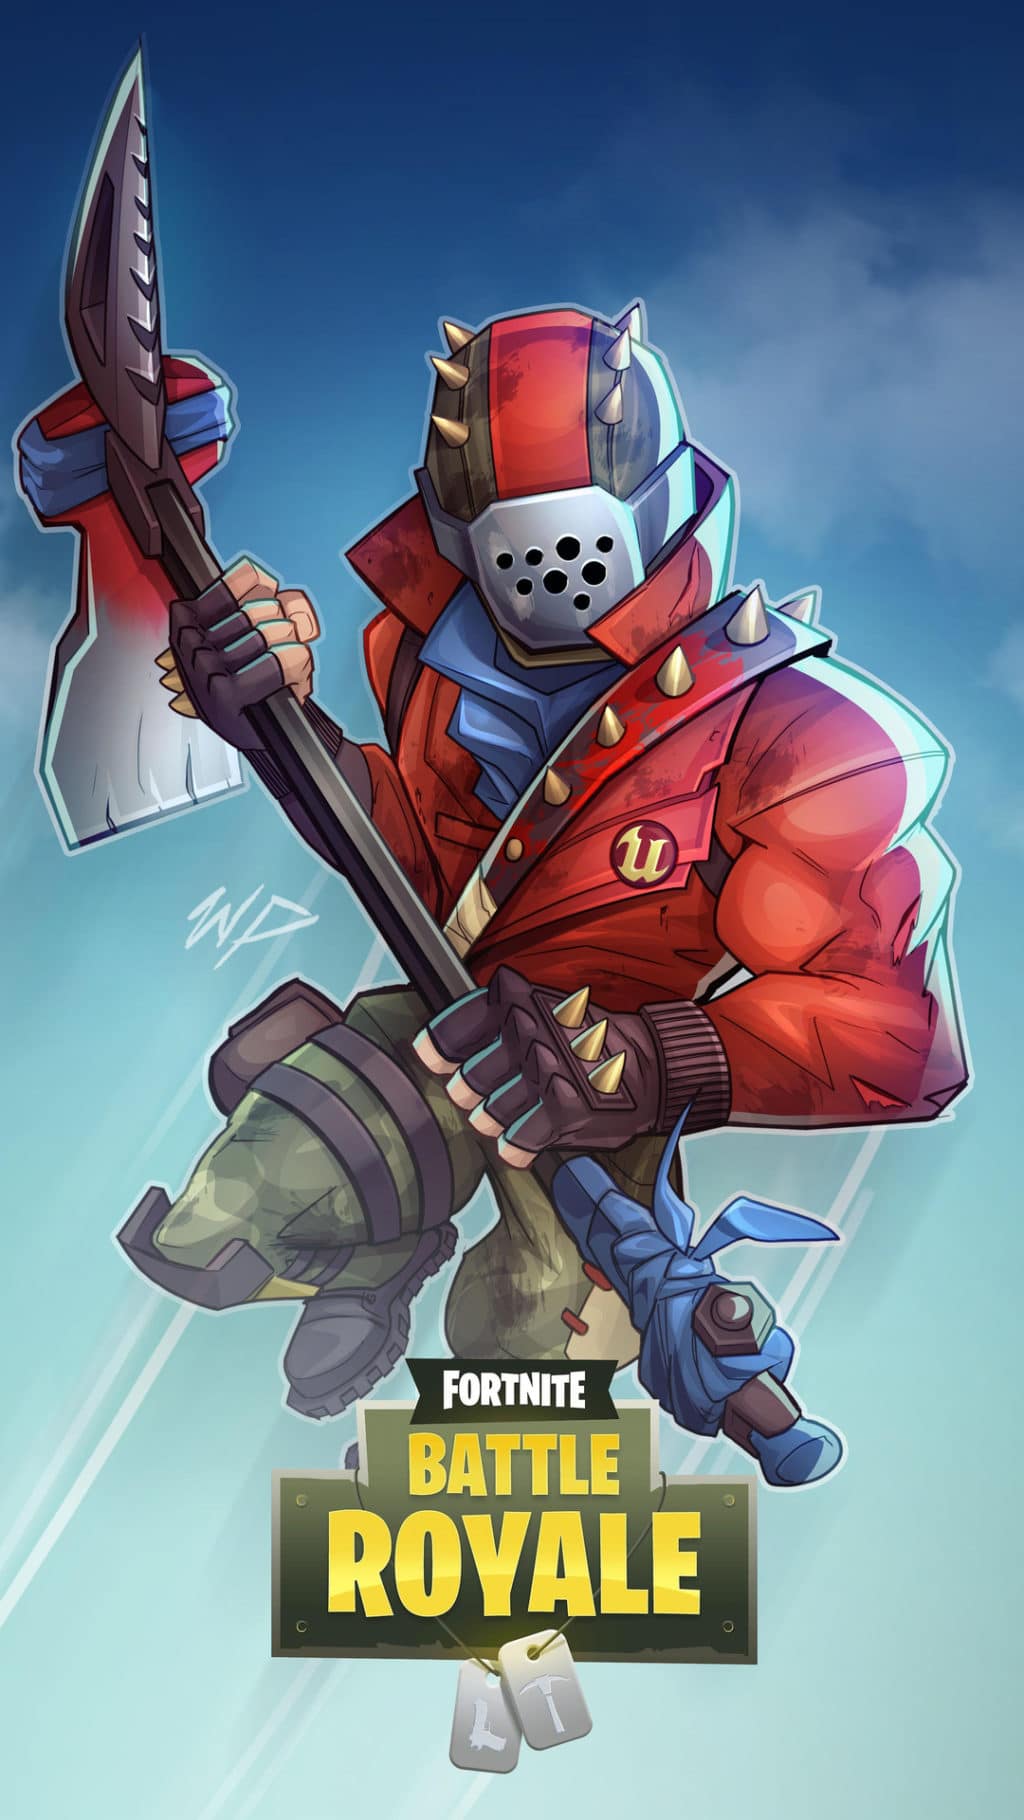 Fortnite iPhone wallpaper by Enegmatix  Download on ZEDGE  64fa